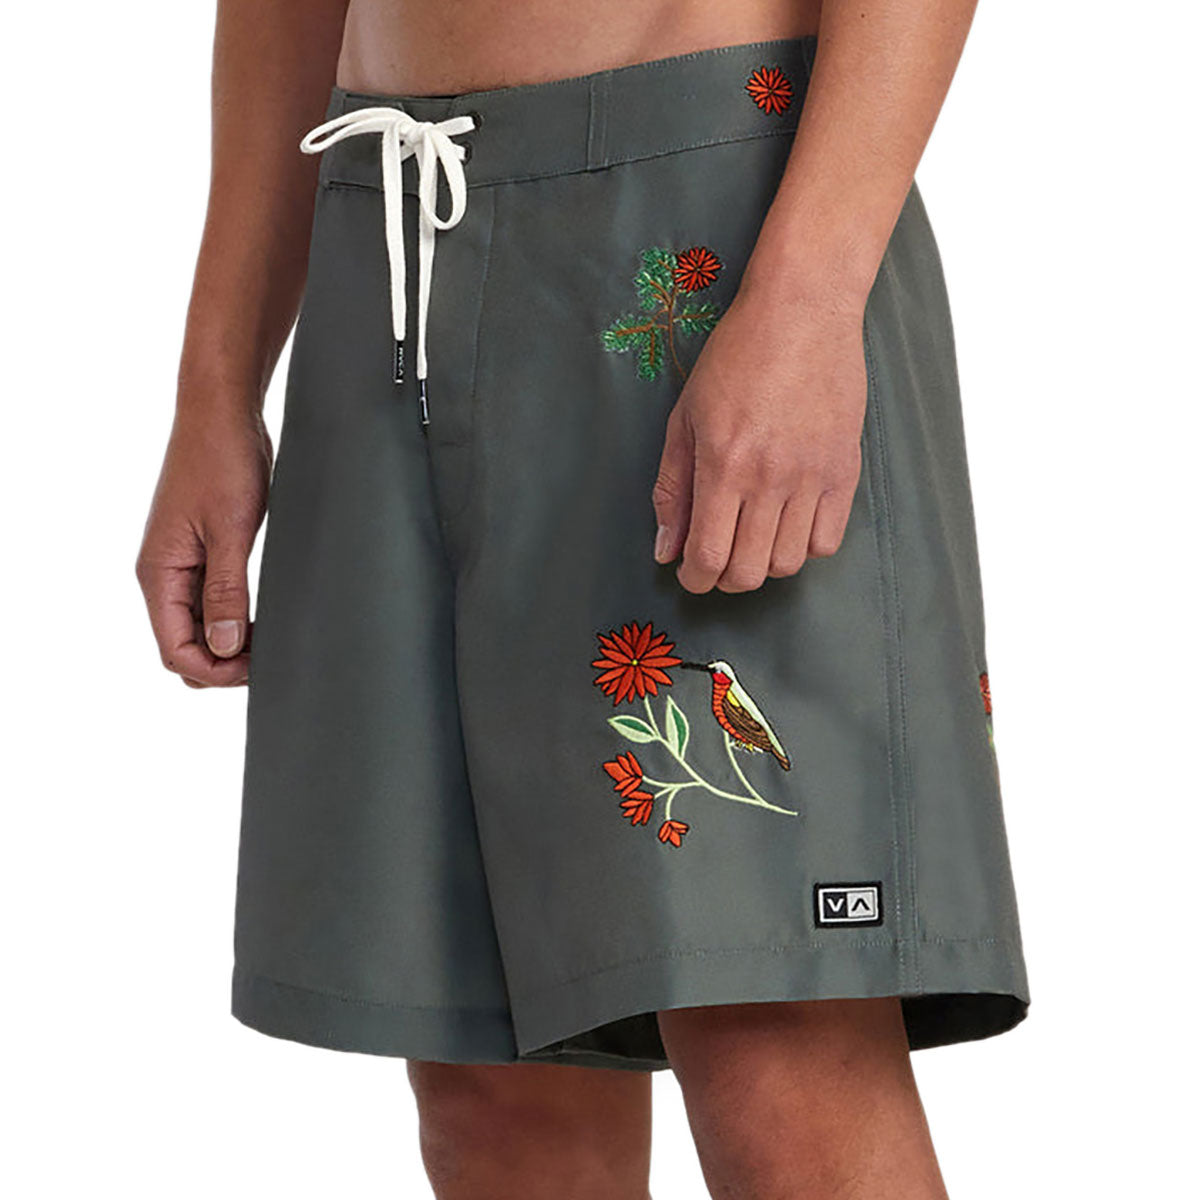 RVCA Anytime Board Shorts - Olive image 5